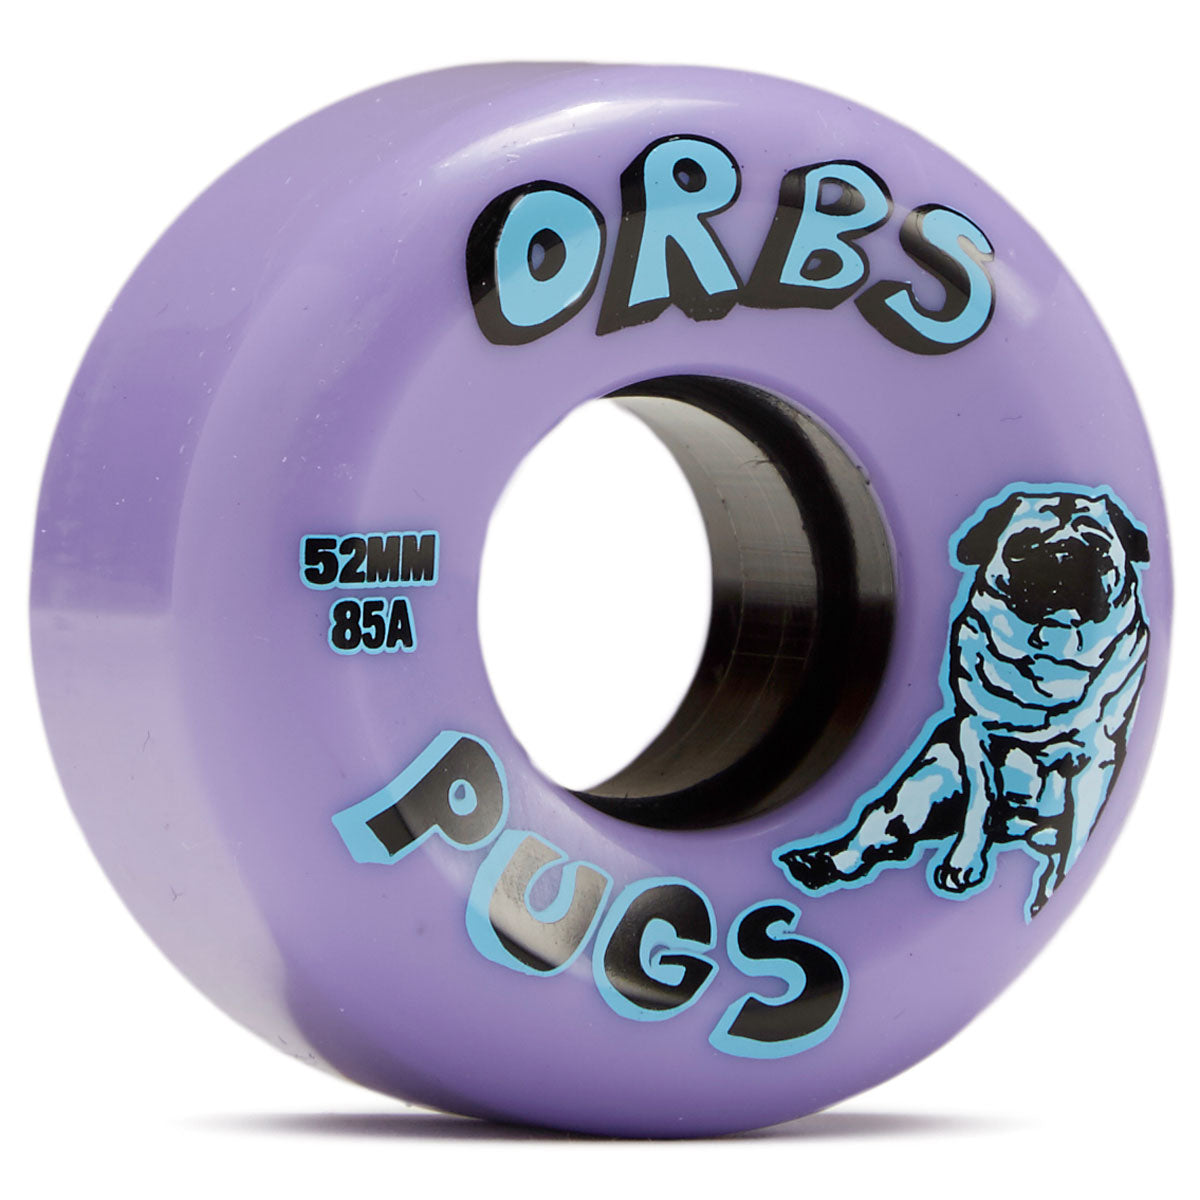 Welcome Orbs Pugs Conical 85A Skateboard Wheels - Lavender - 52mm image 1